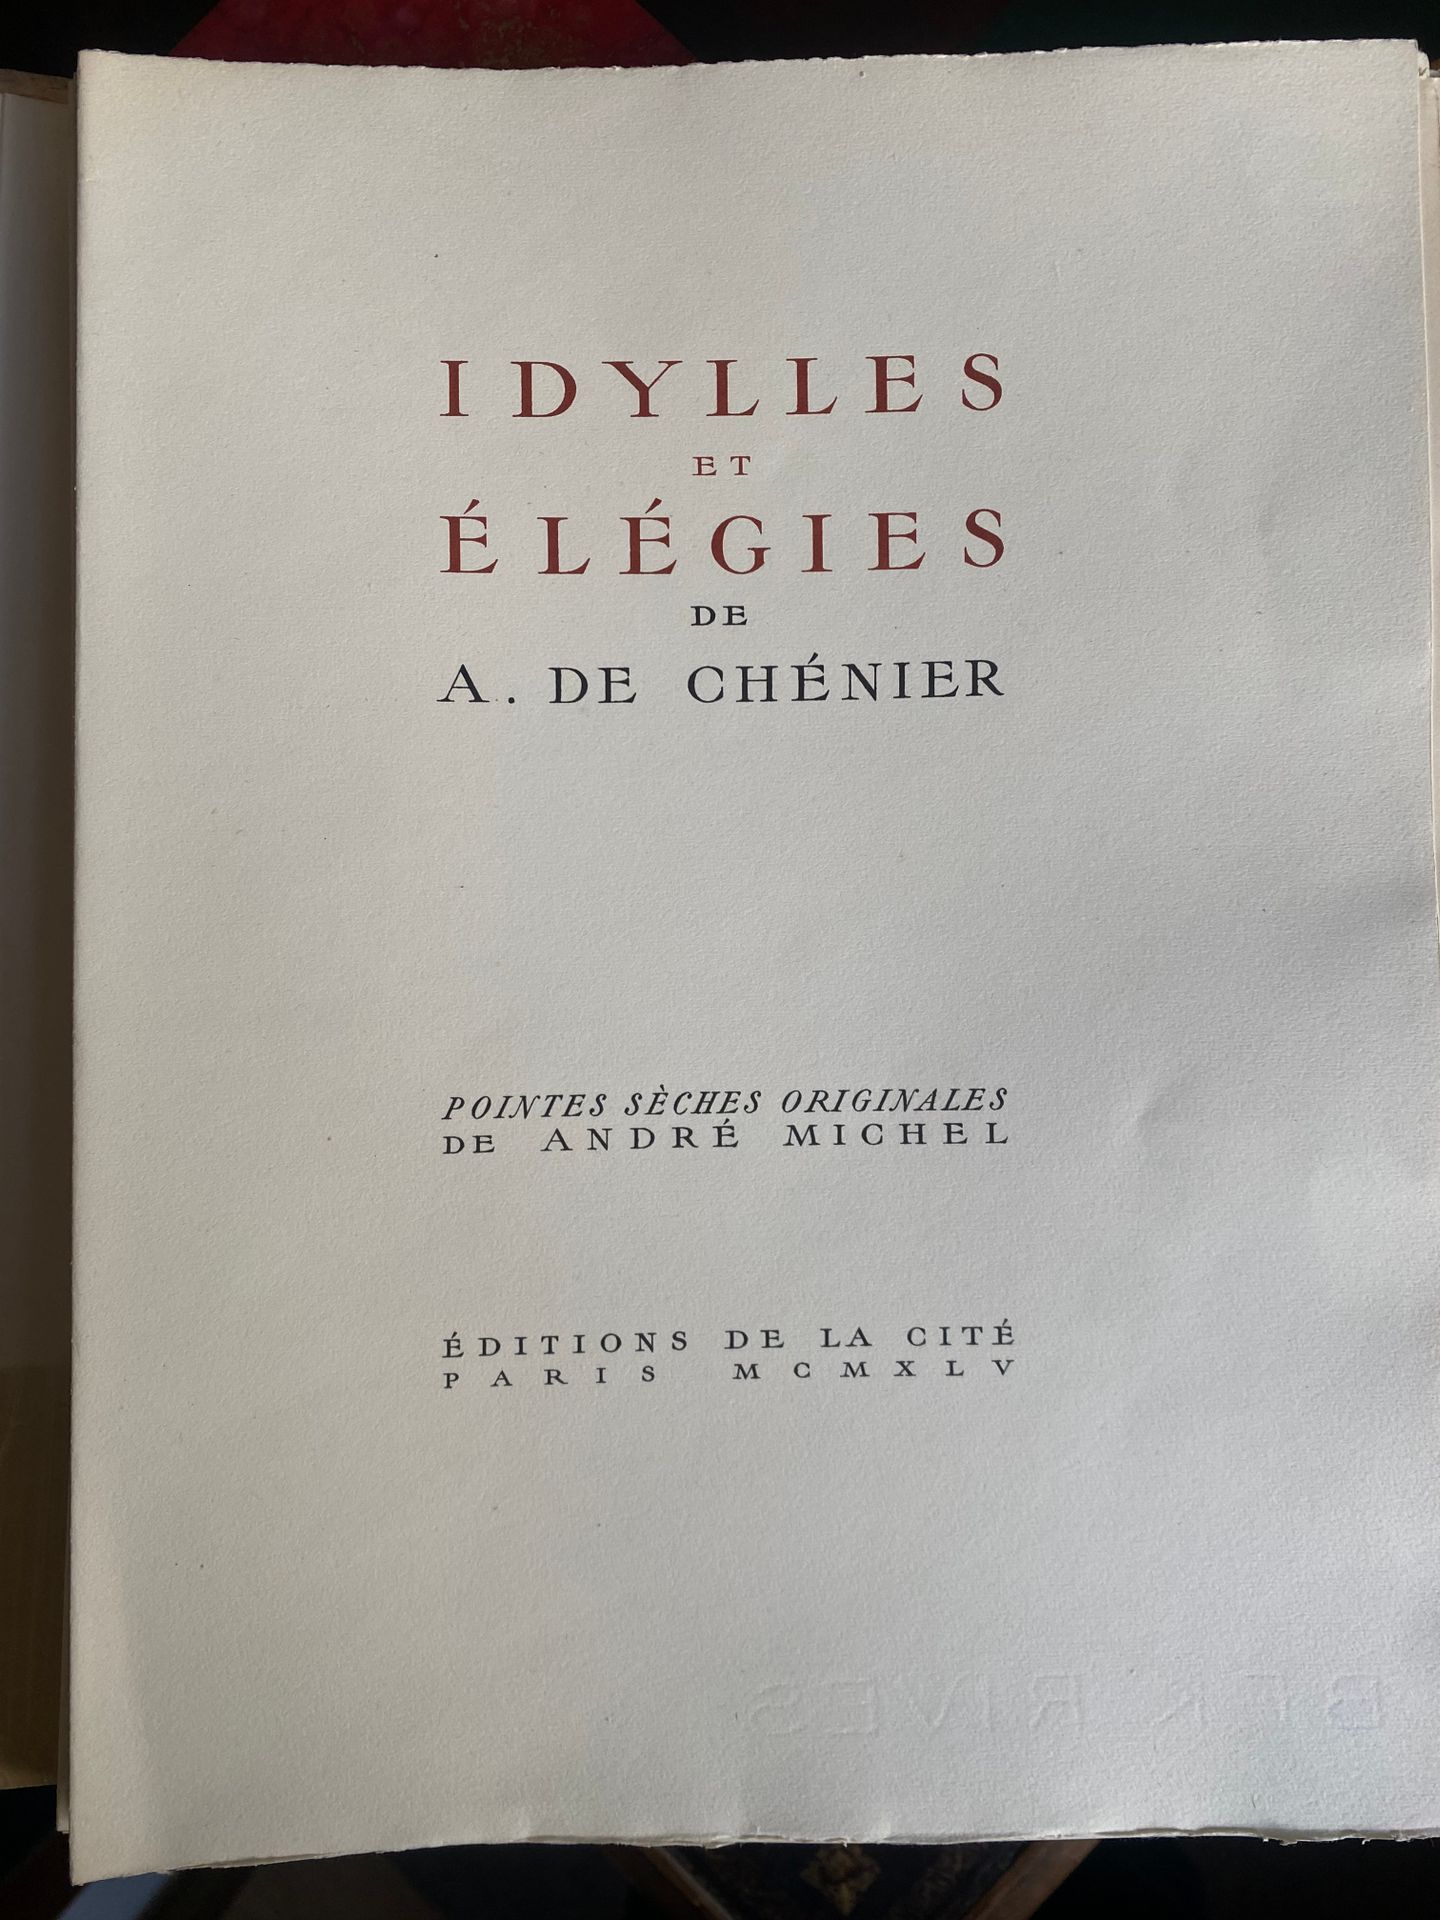 Null [MICHEL] André de CHENIER.
Idylls and Elegies. Pointes-sèches by André Mich&hellip;